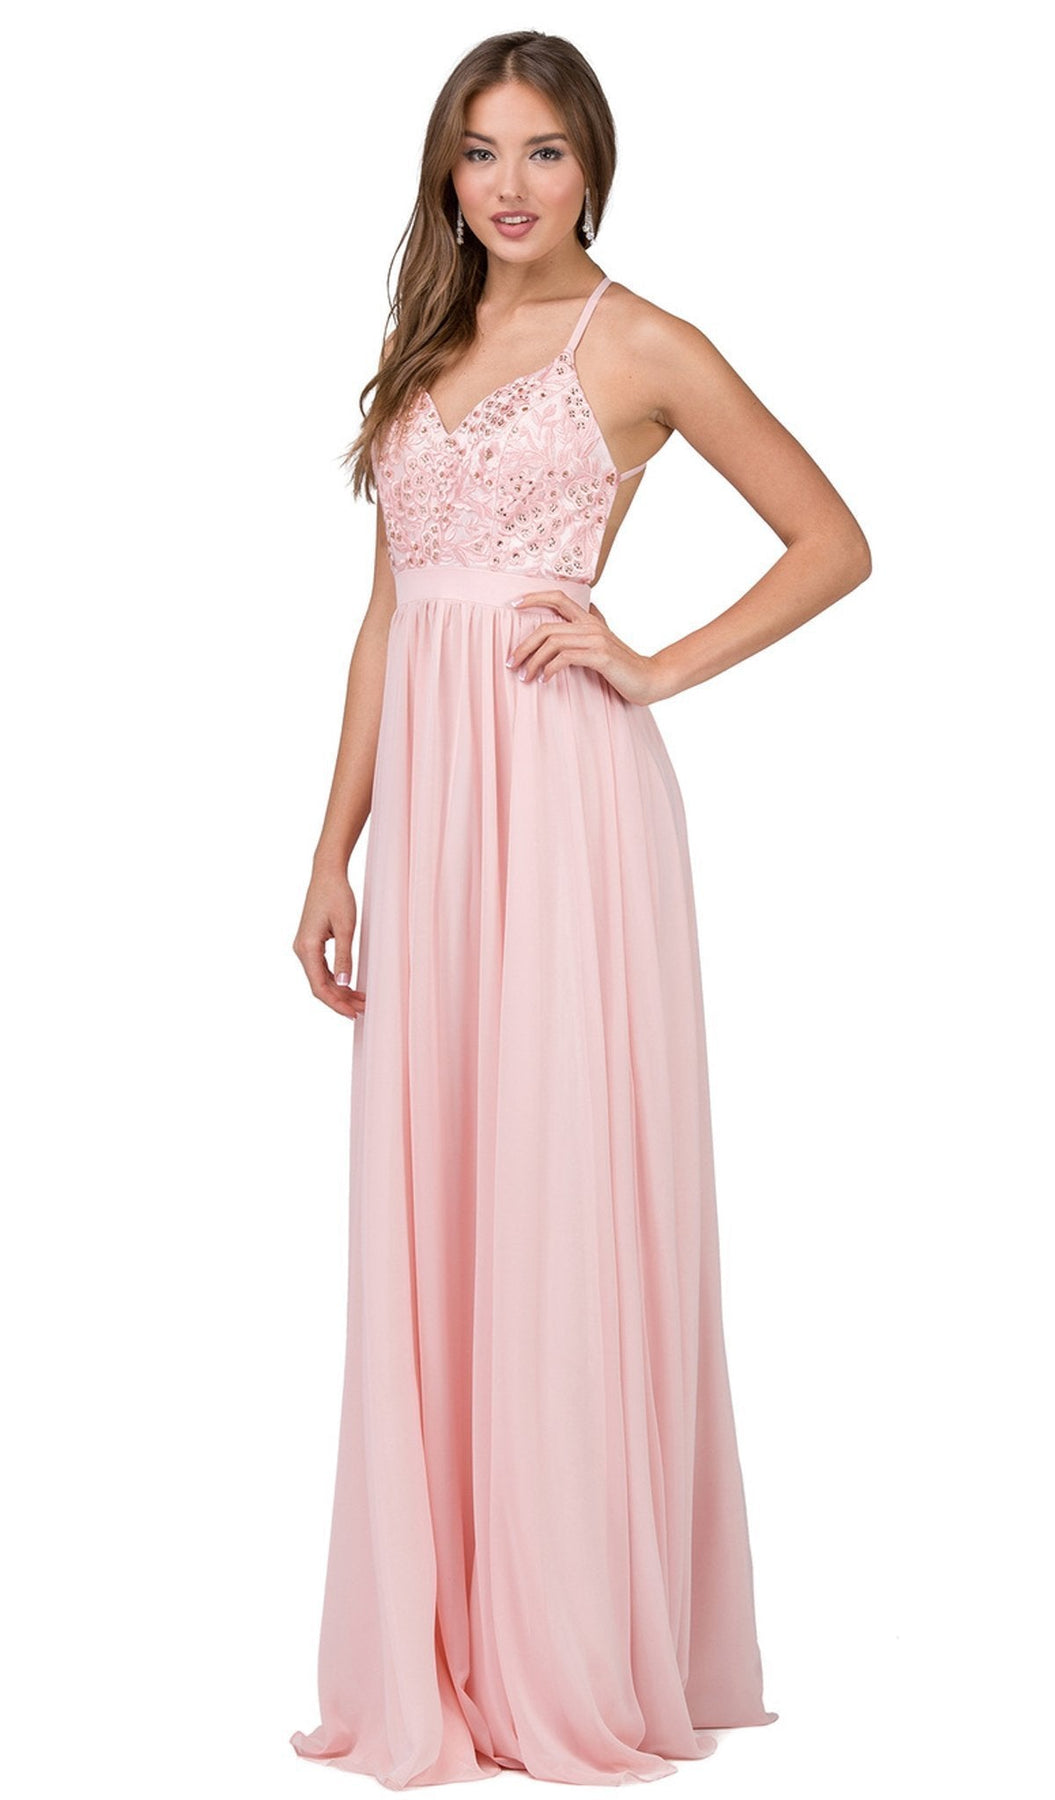 Dancing Queen - 9850 Beaded Lace V-neck A-line Prom Dress Special Occasion Dress XS / Blush